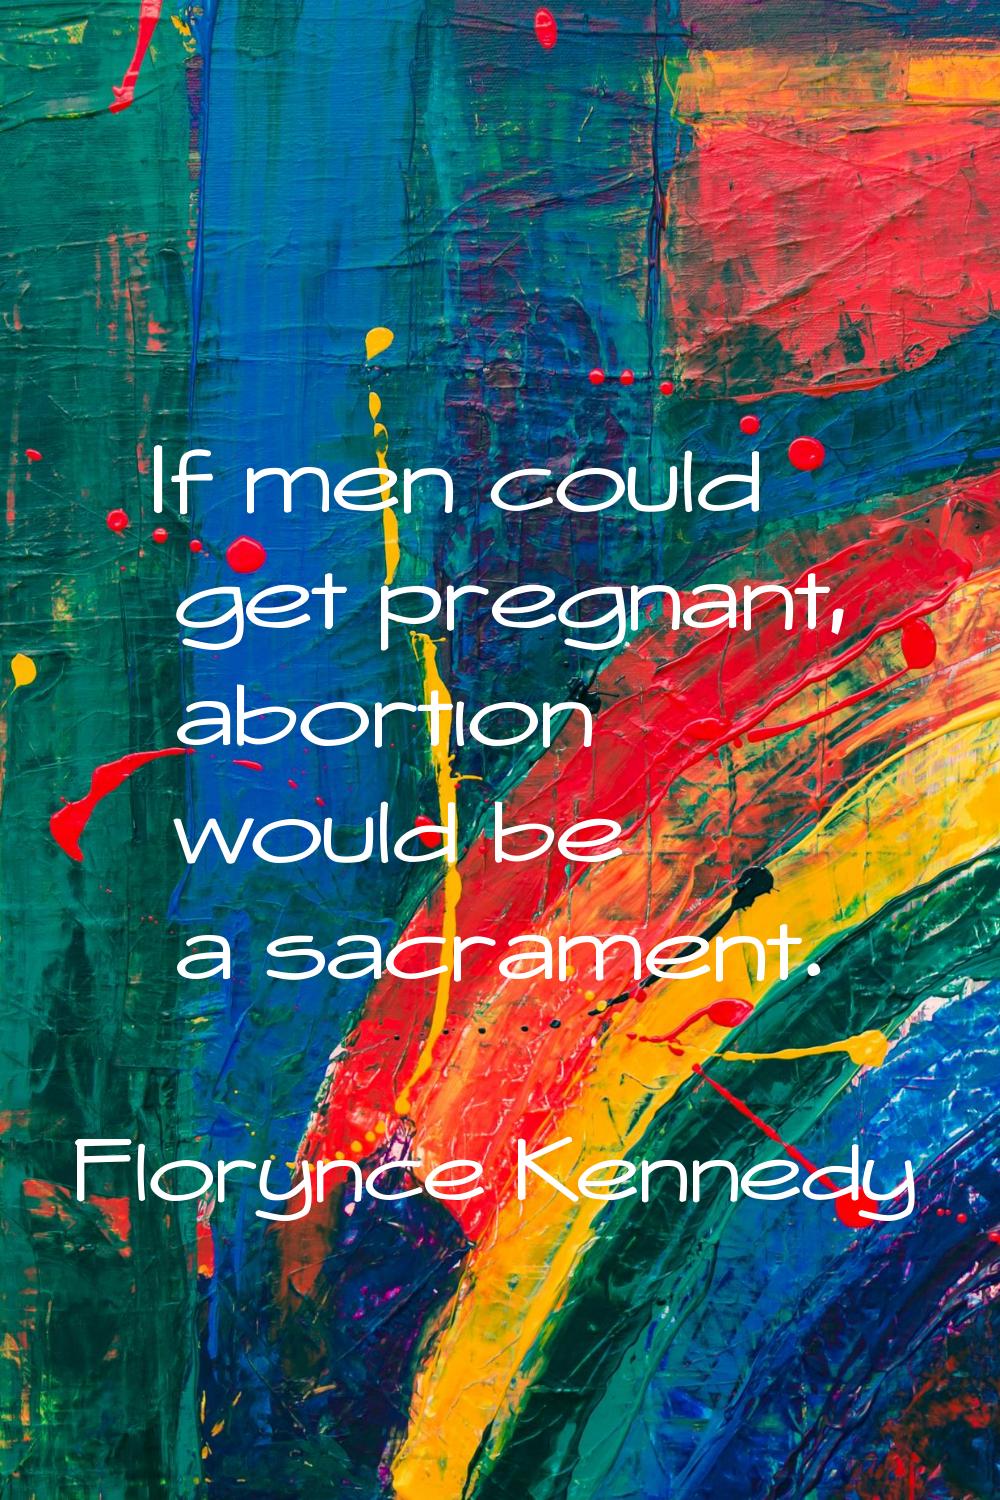 If men could get pregnant, abortion would be a sacrament.